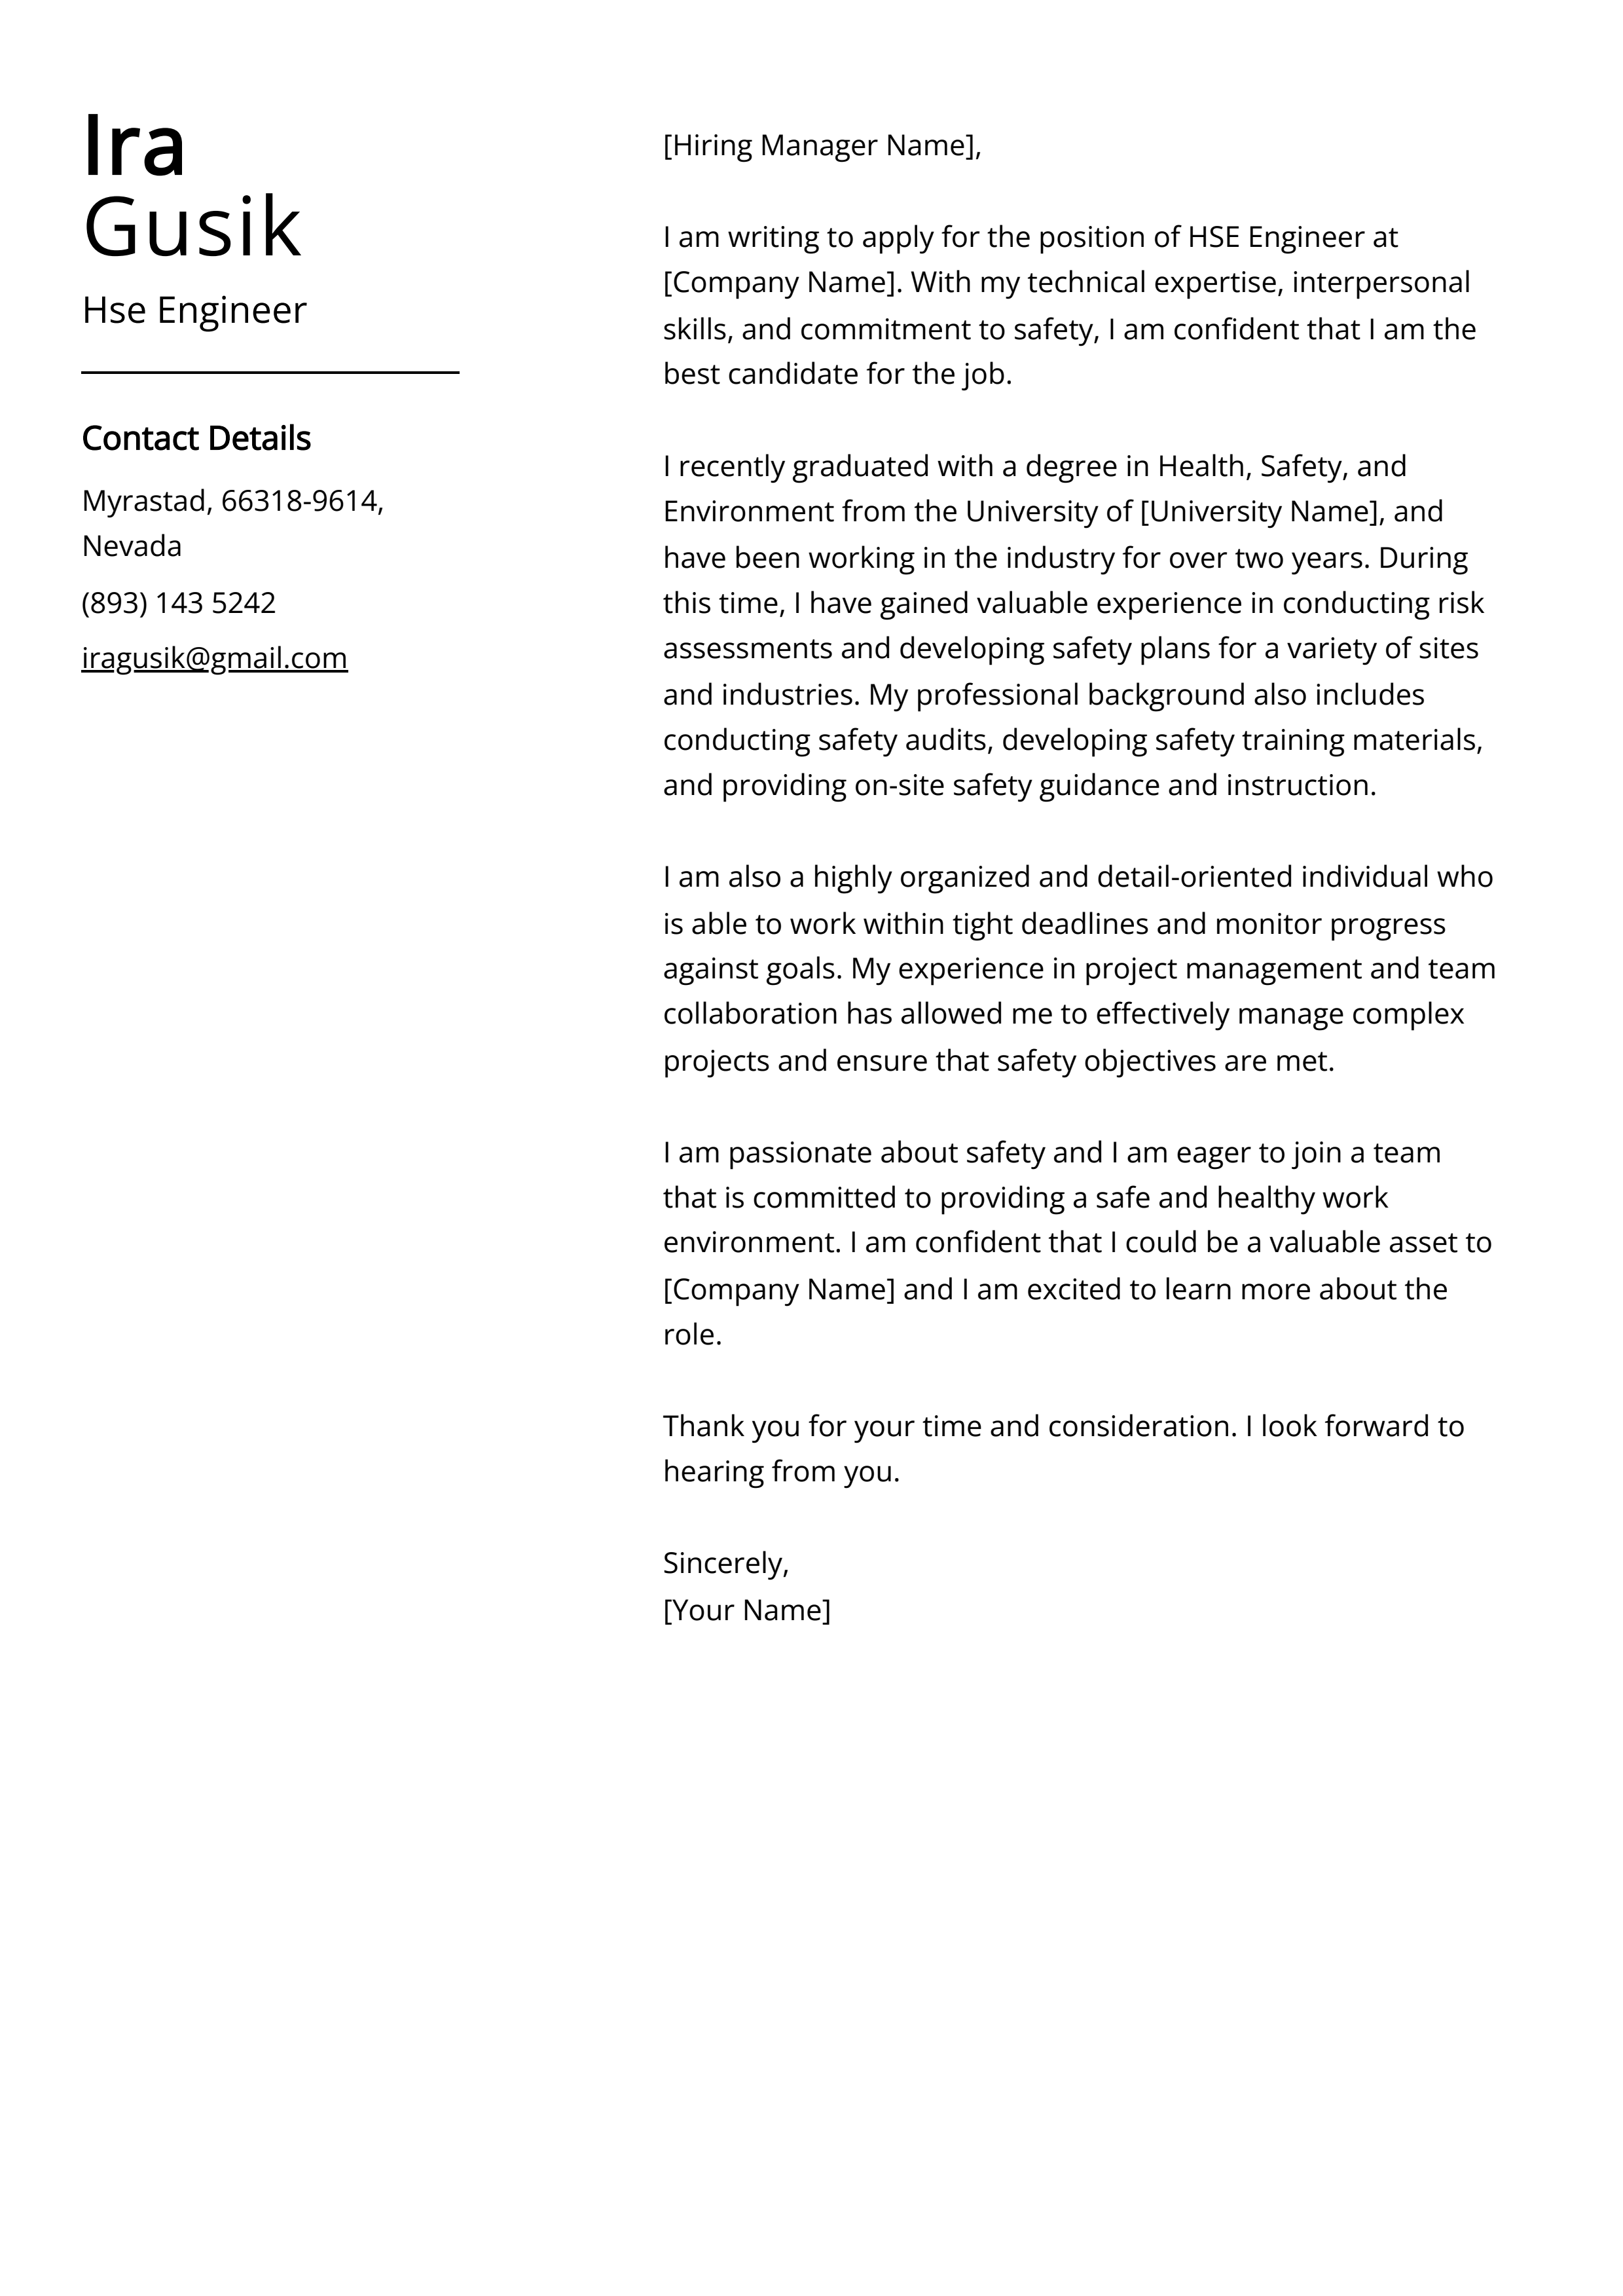 Hse Engineer Cover Letter Example